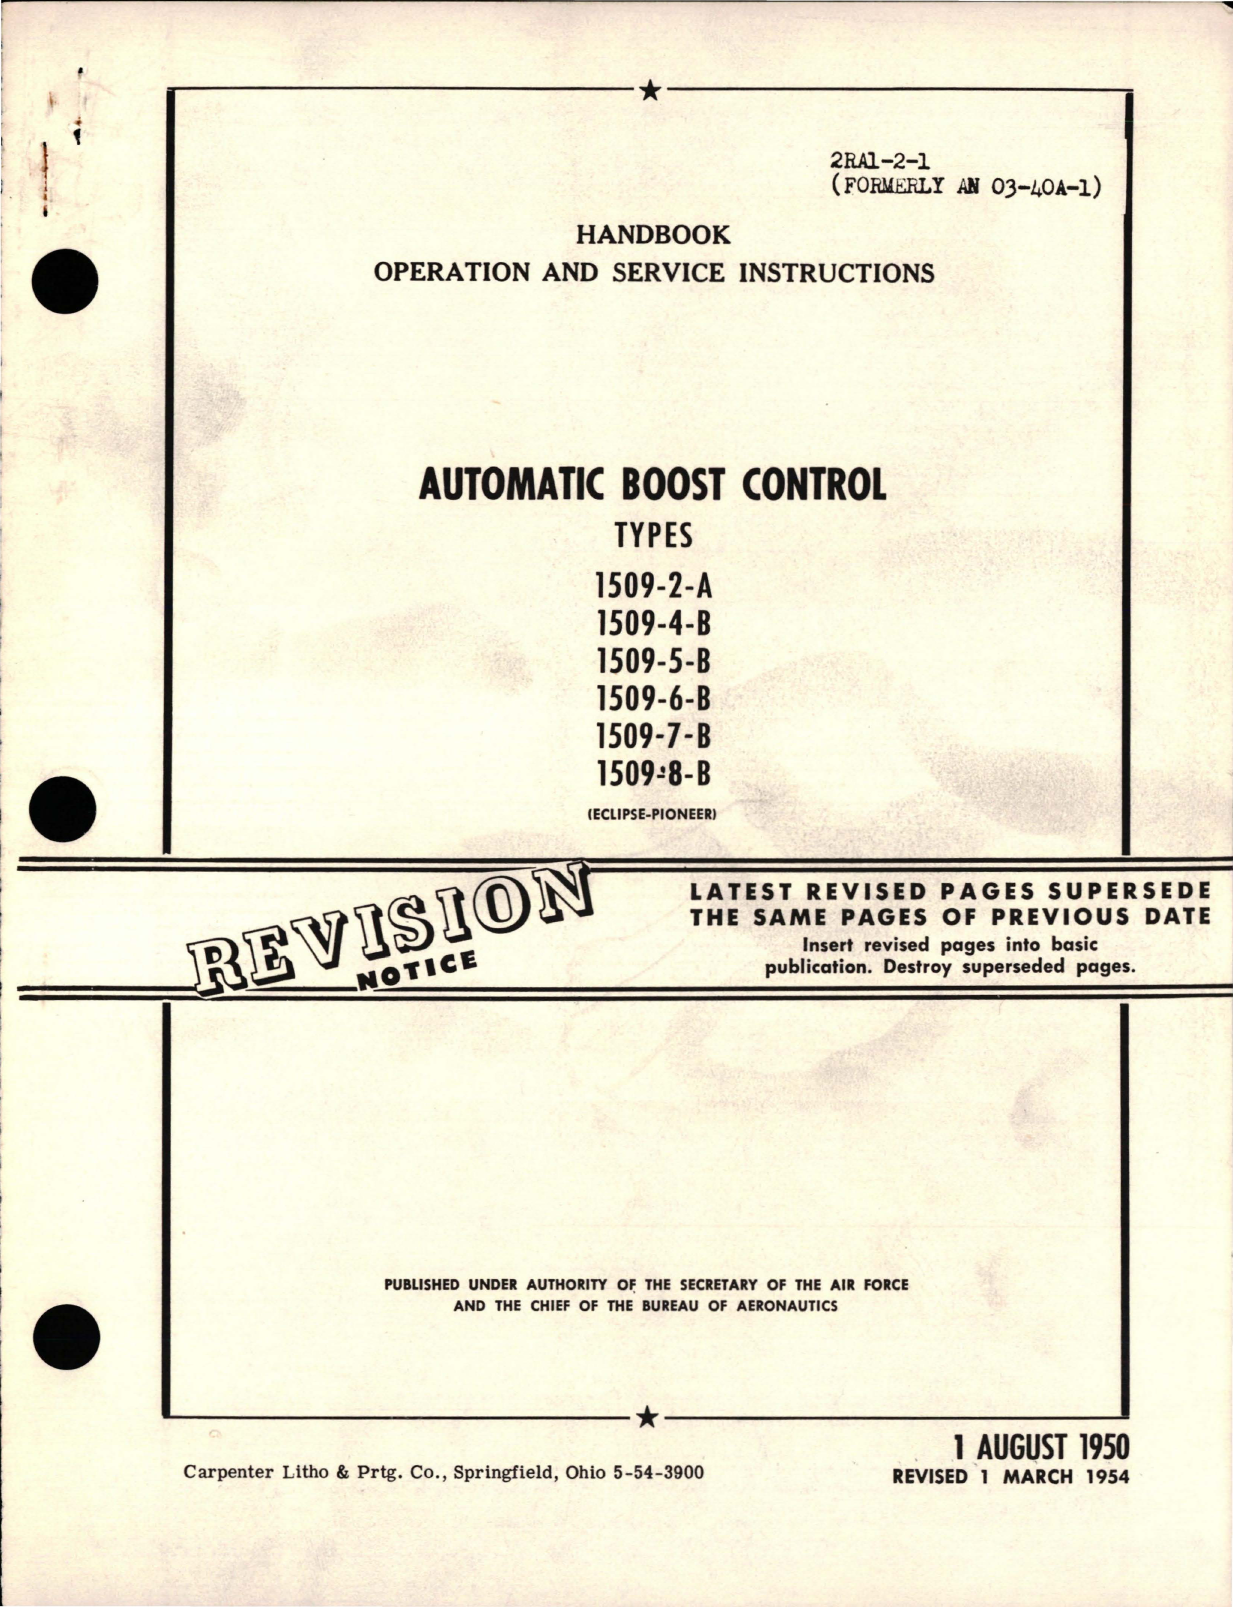 Sample page 1 from AirCorps Library document: Operation and Service Instructions for Automatic Boost Control